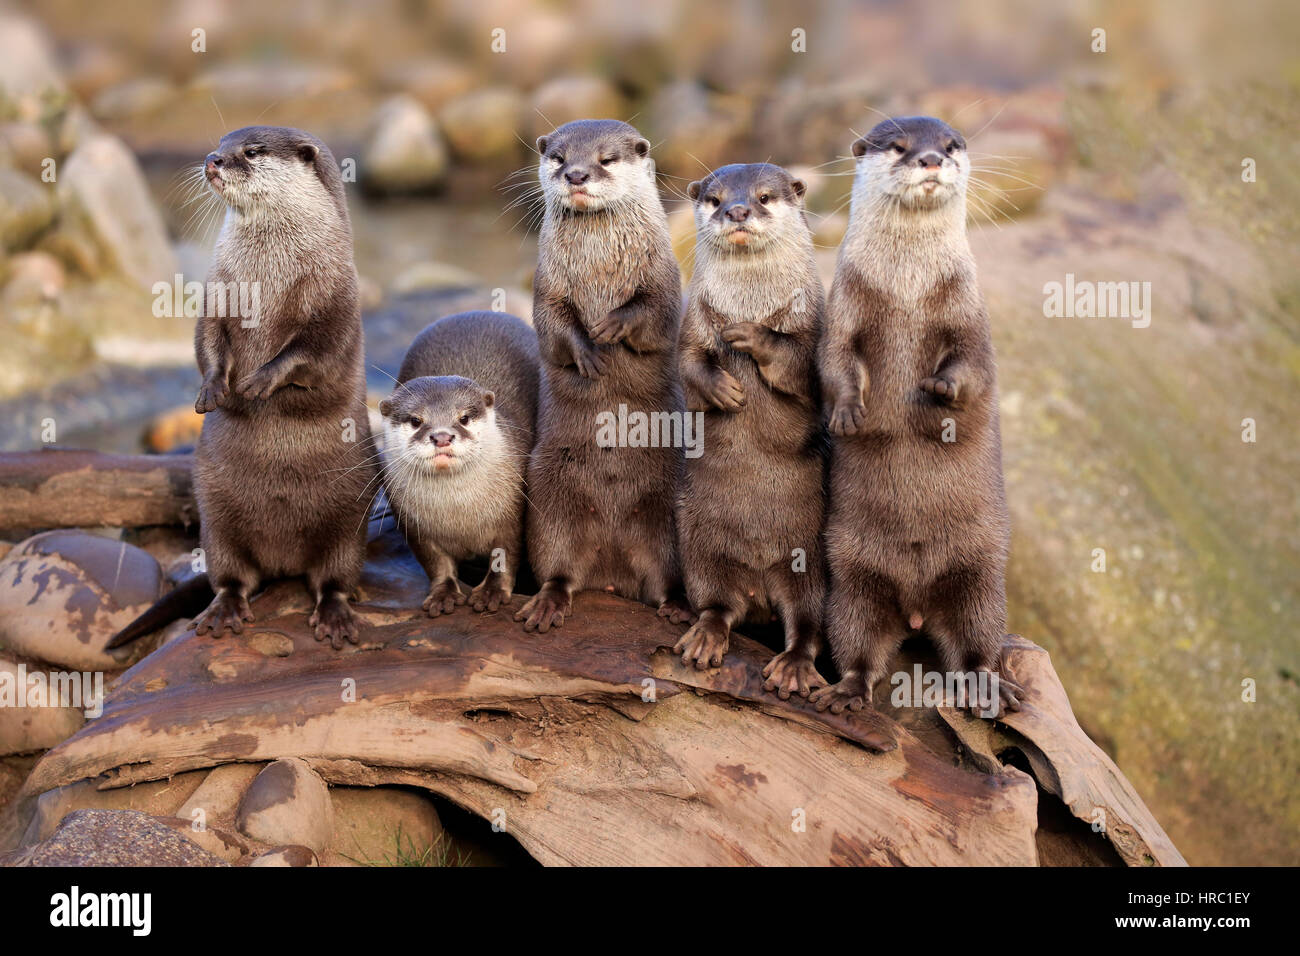 Oriental small-clawed Otter, (Amblonyx cinerea), group of adults standing upright, alert, Asia Stock Photo